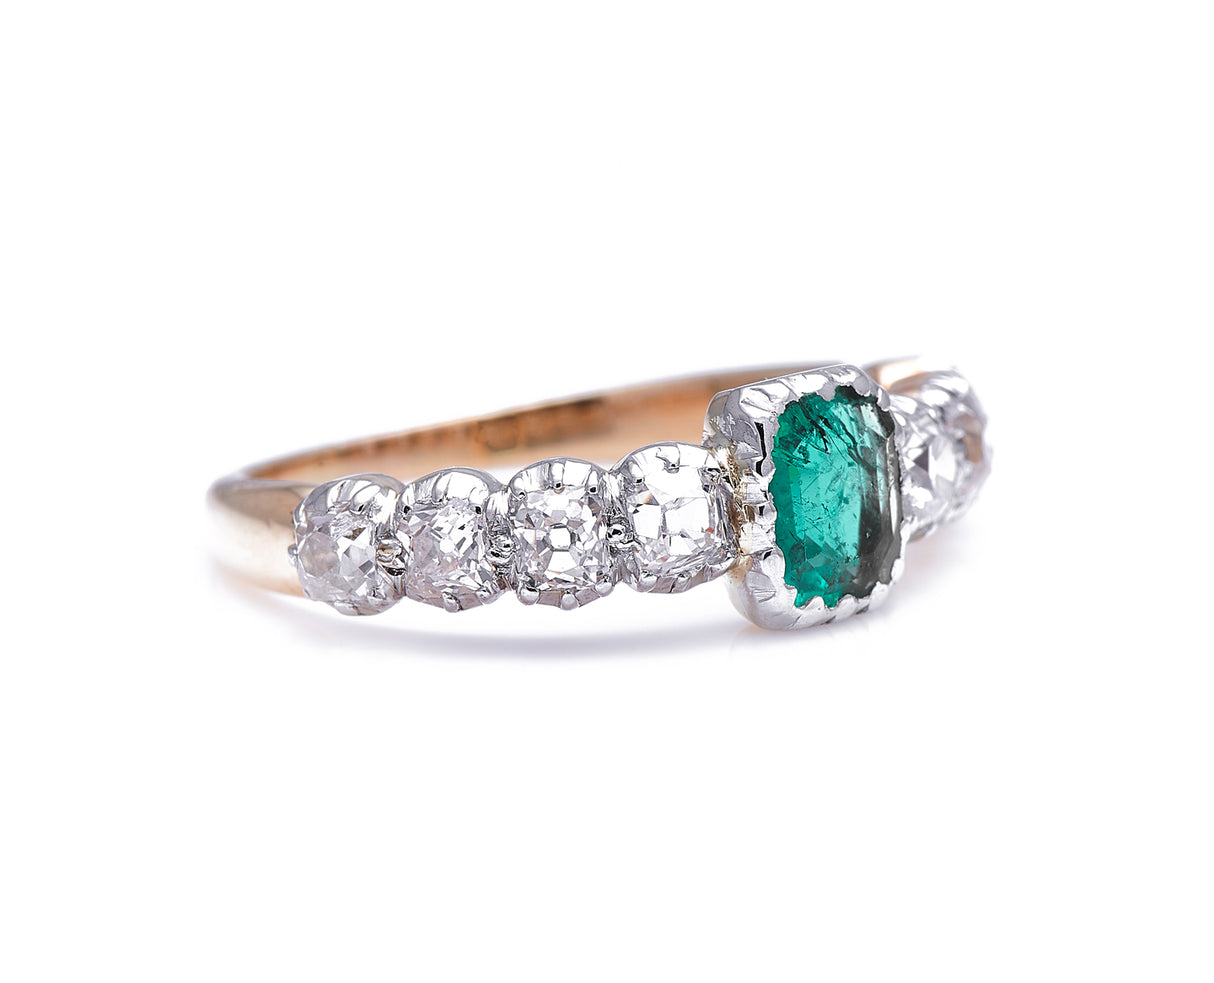 Early Victorian, 18ct Gold, Silver, Emerald and Diamond Ring